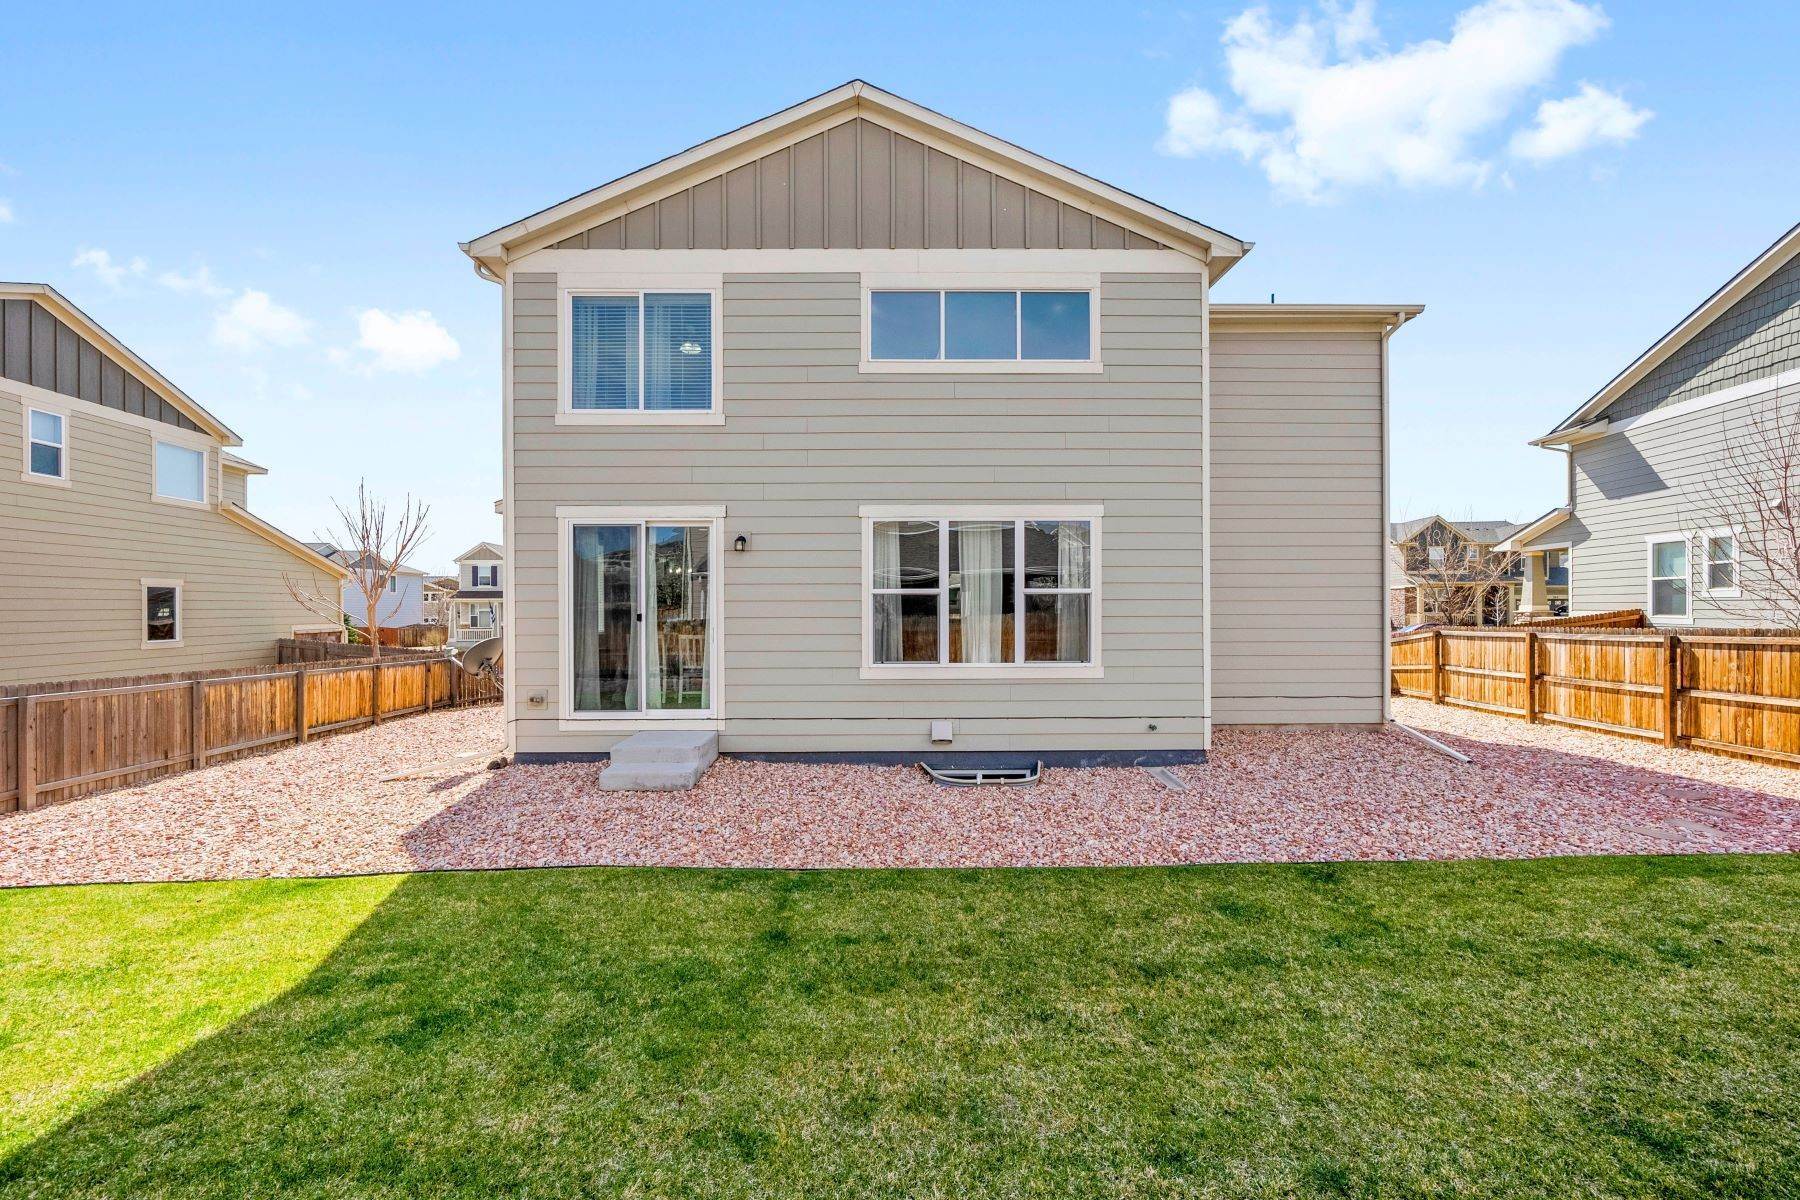 39. Single Family Homes for Active at 356 Matsuno Street, Brighton, CO, 80601 356 Matsuno Street Brighton, Colorado 80601 United States